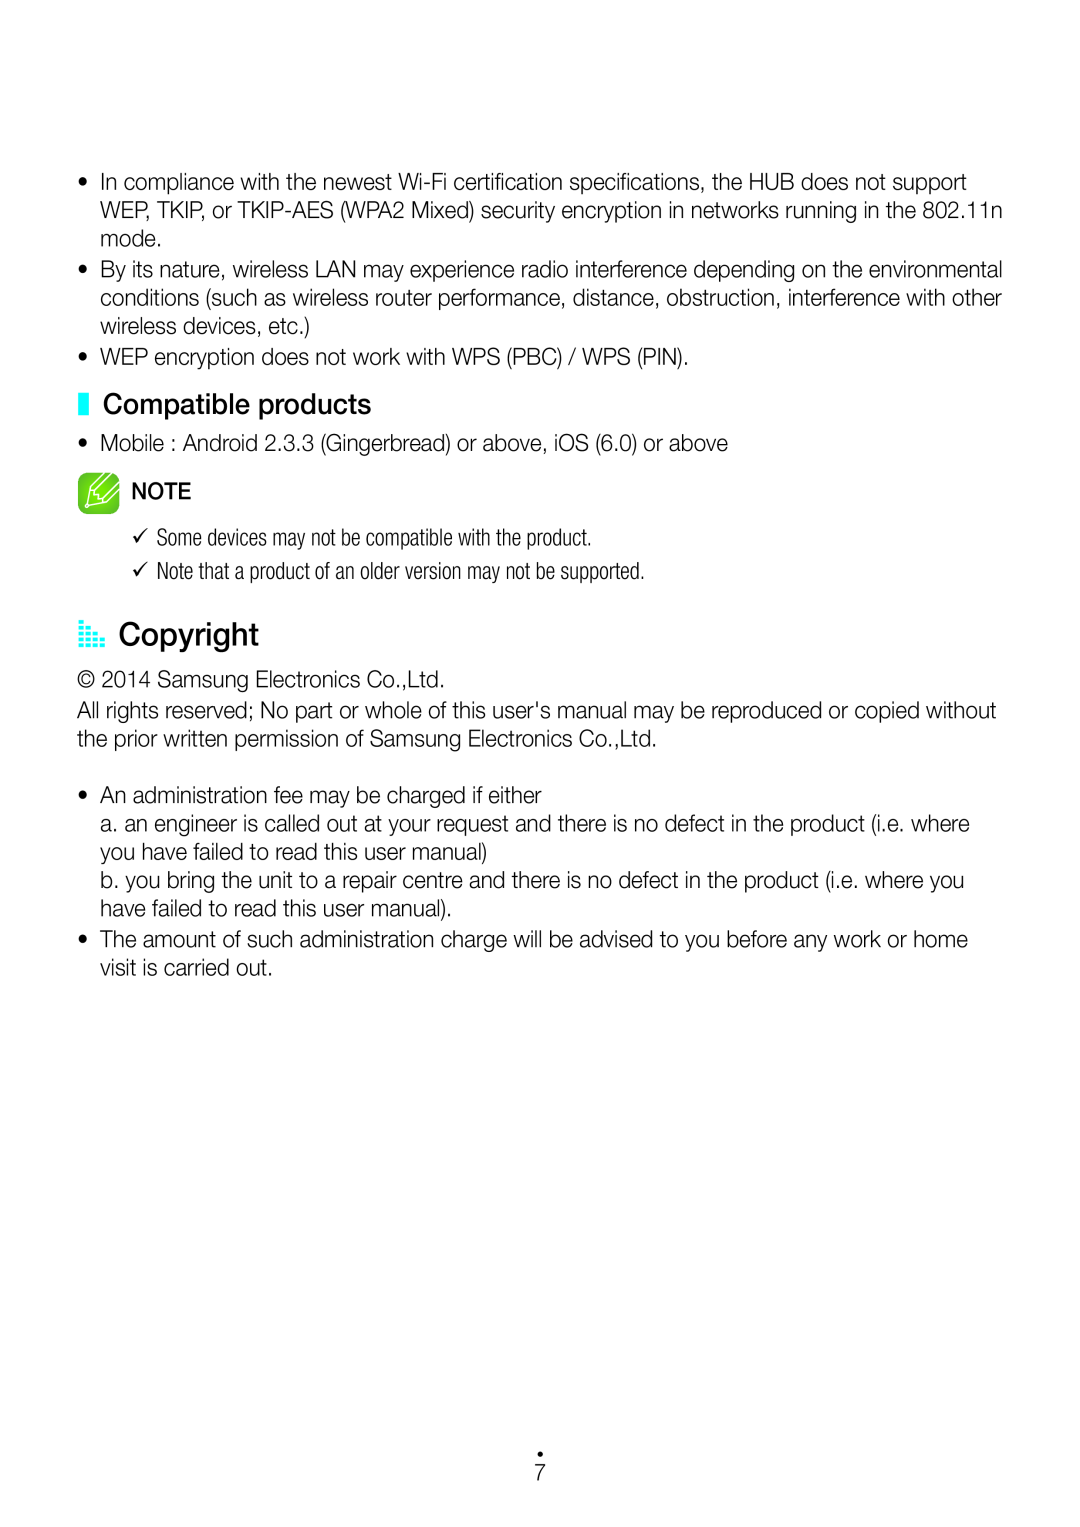 Samsung M5 user manual AA Copyright, Compatible products 